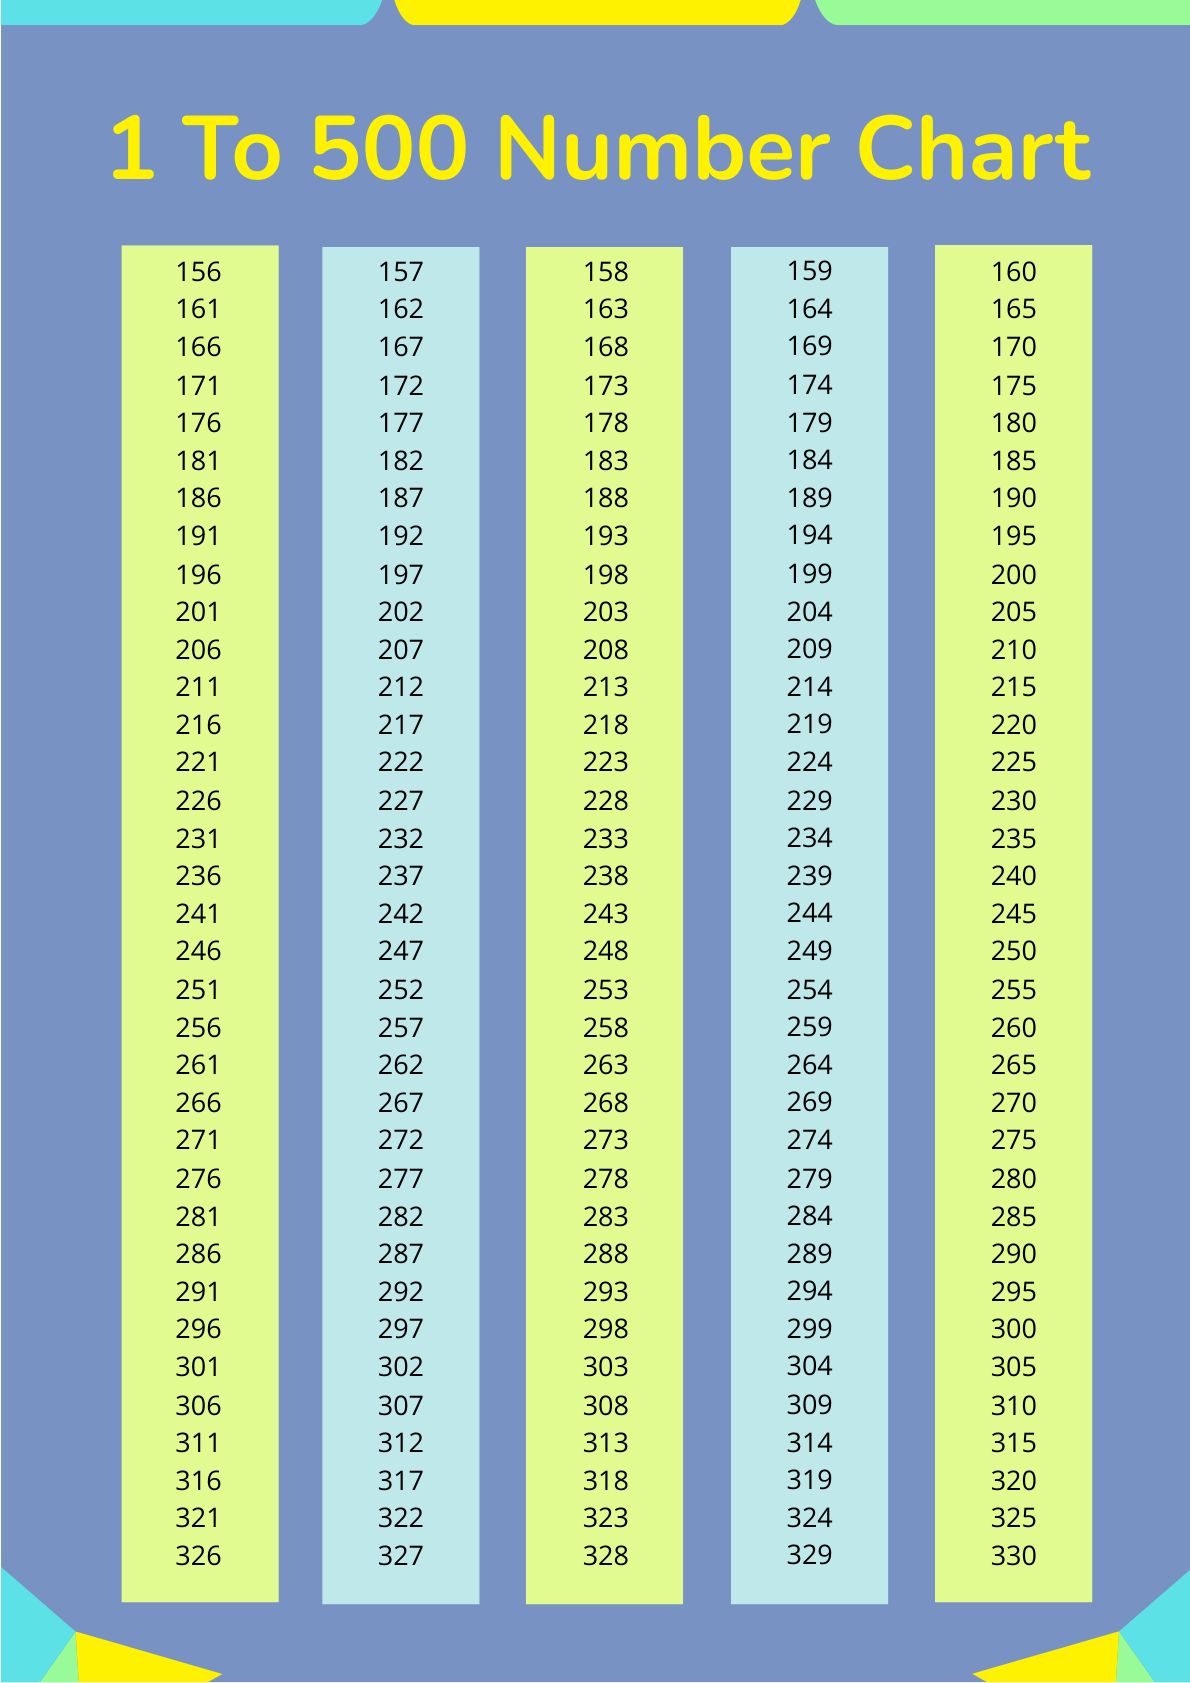 1 To 500 Number Chart